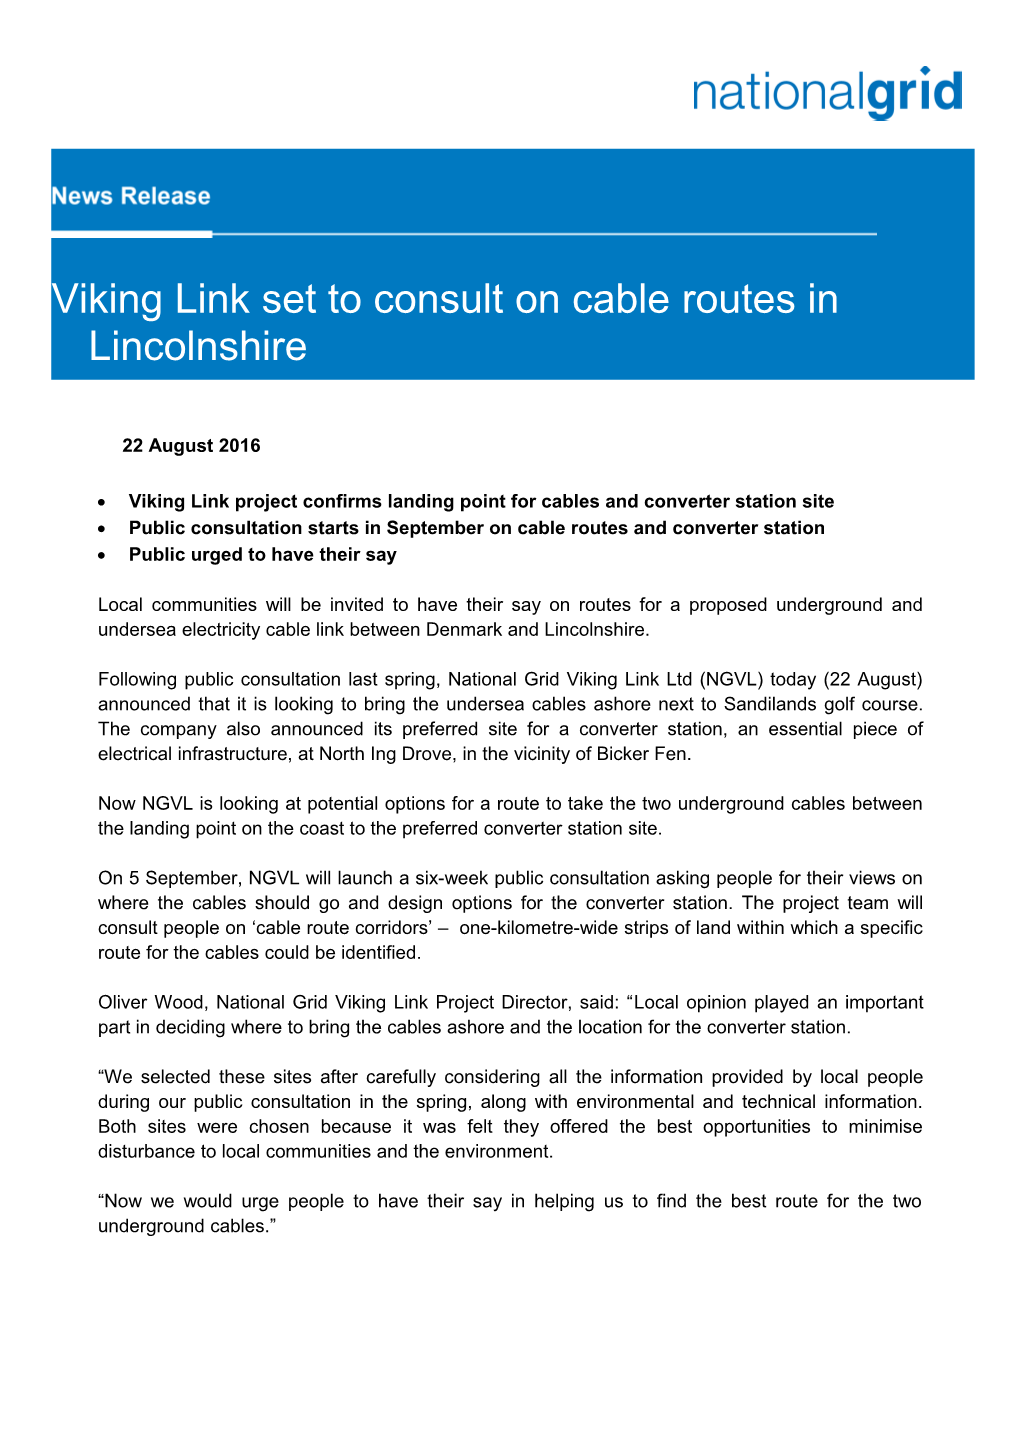 Viking Link Project Confirms Landing Point for Cables and Converter Station Site